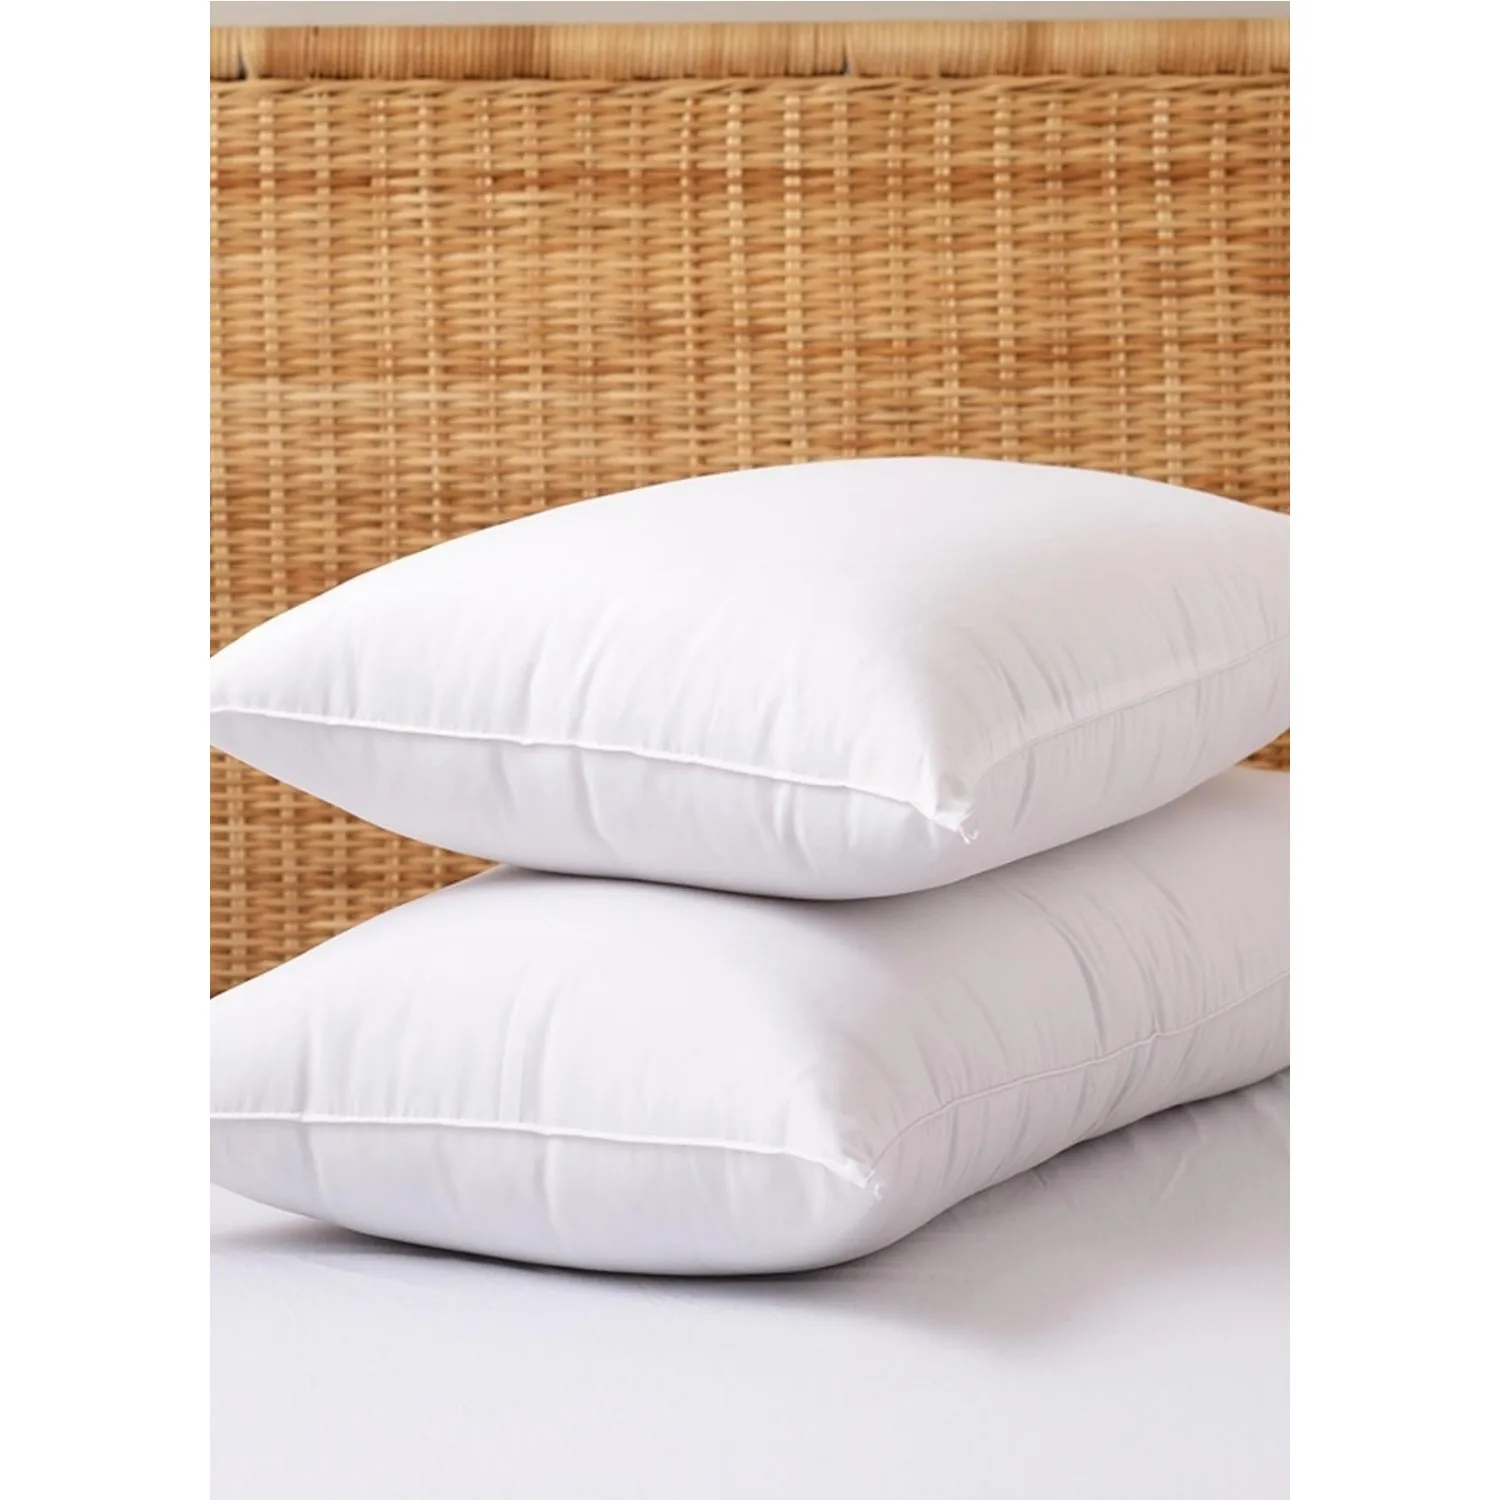 Madame Coco Silicone Pillow % 100 Cotton 50x70 cm 600gr 2pcs Cushion Comfortable Sleep Coussin Made in turkey for Home Throw Seat